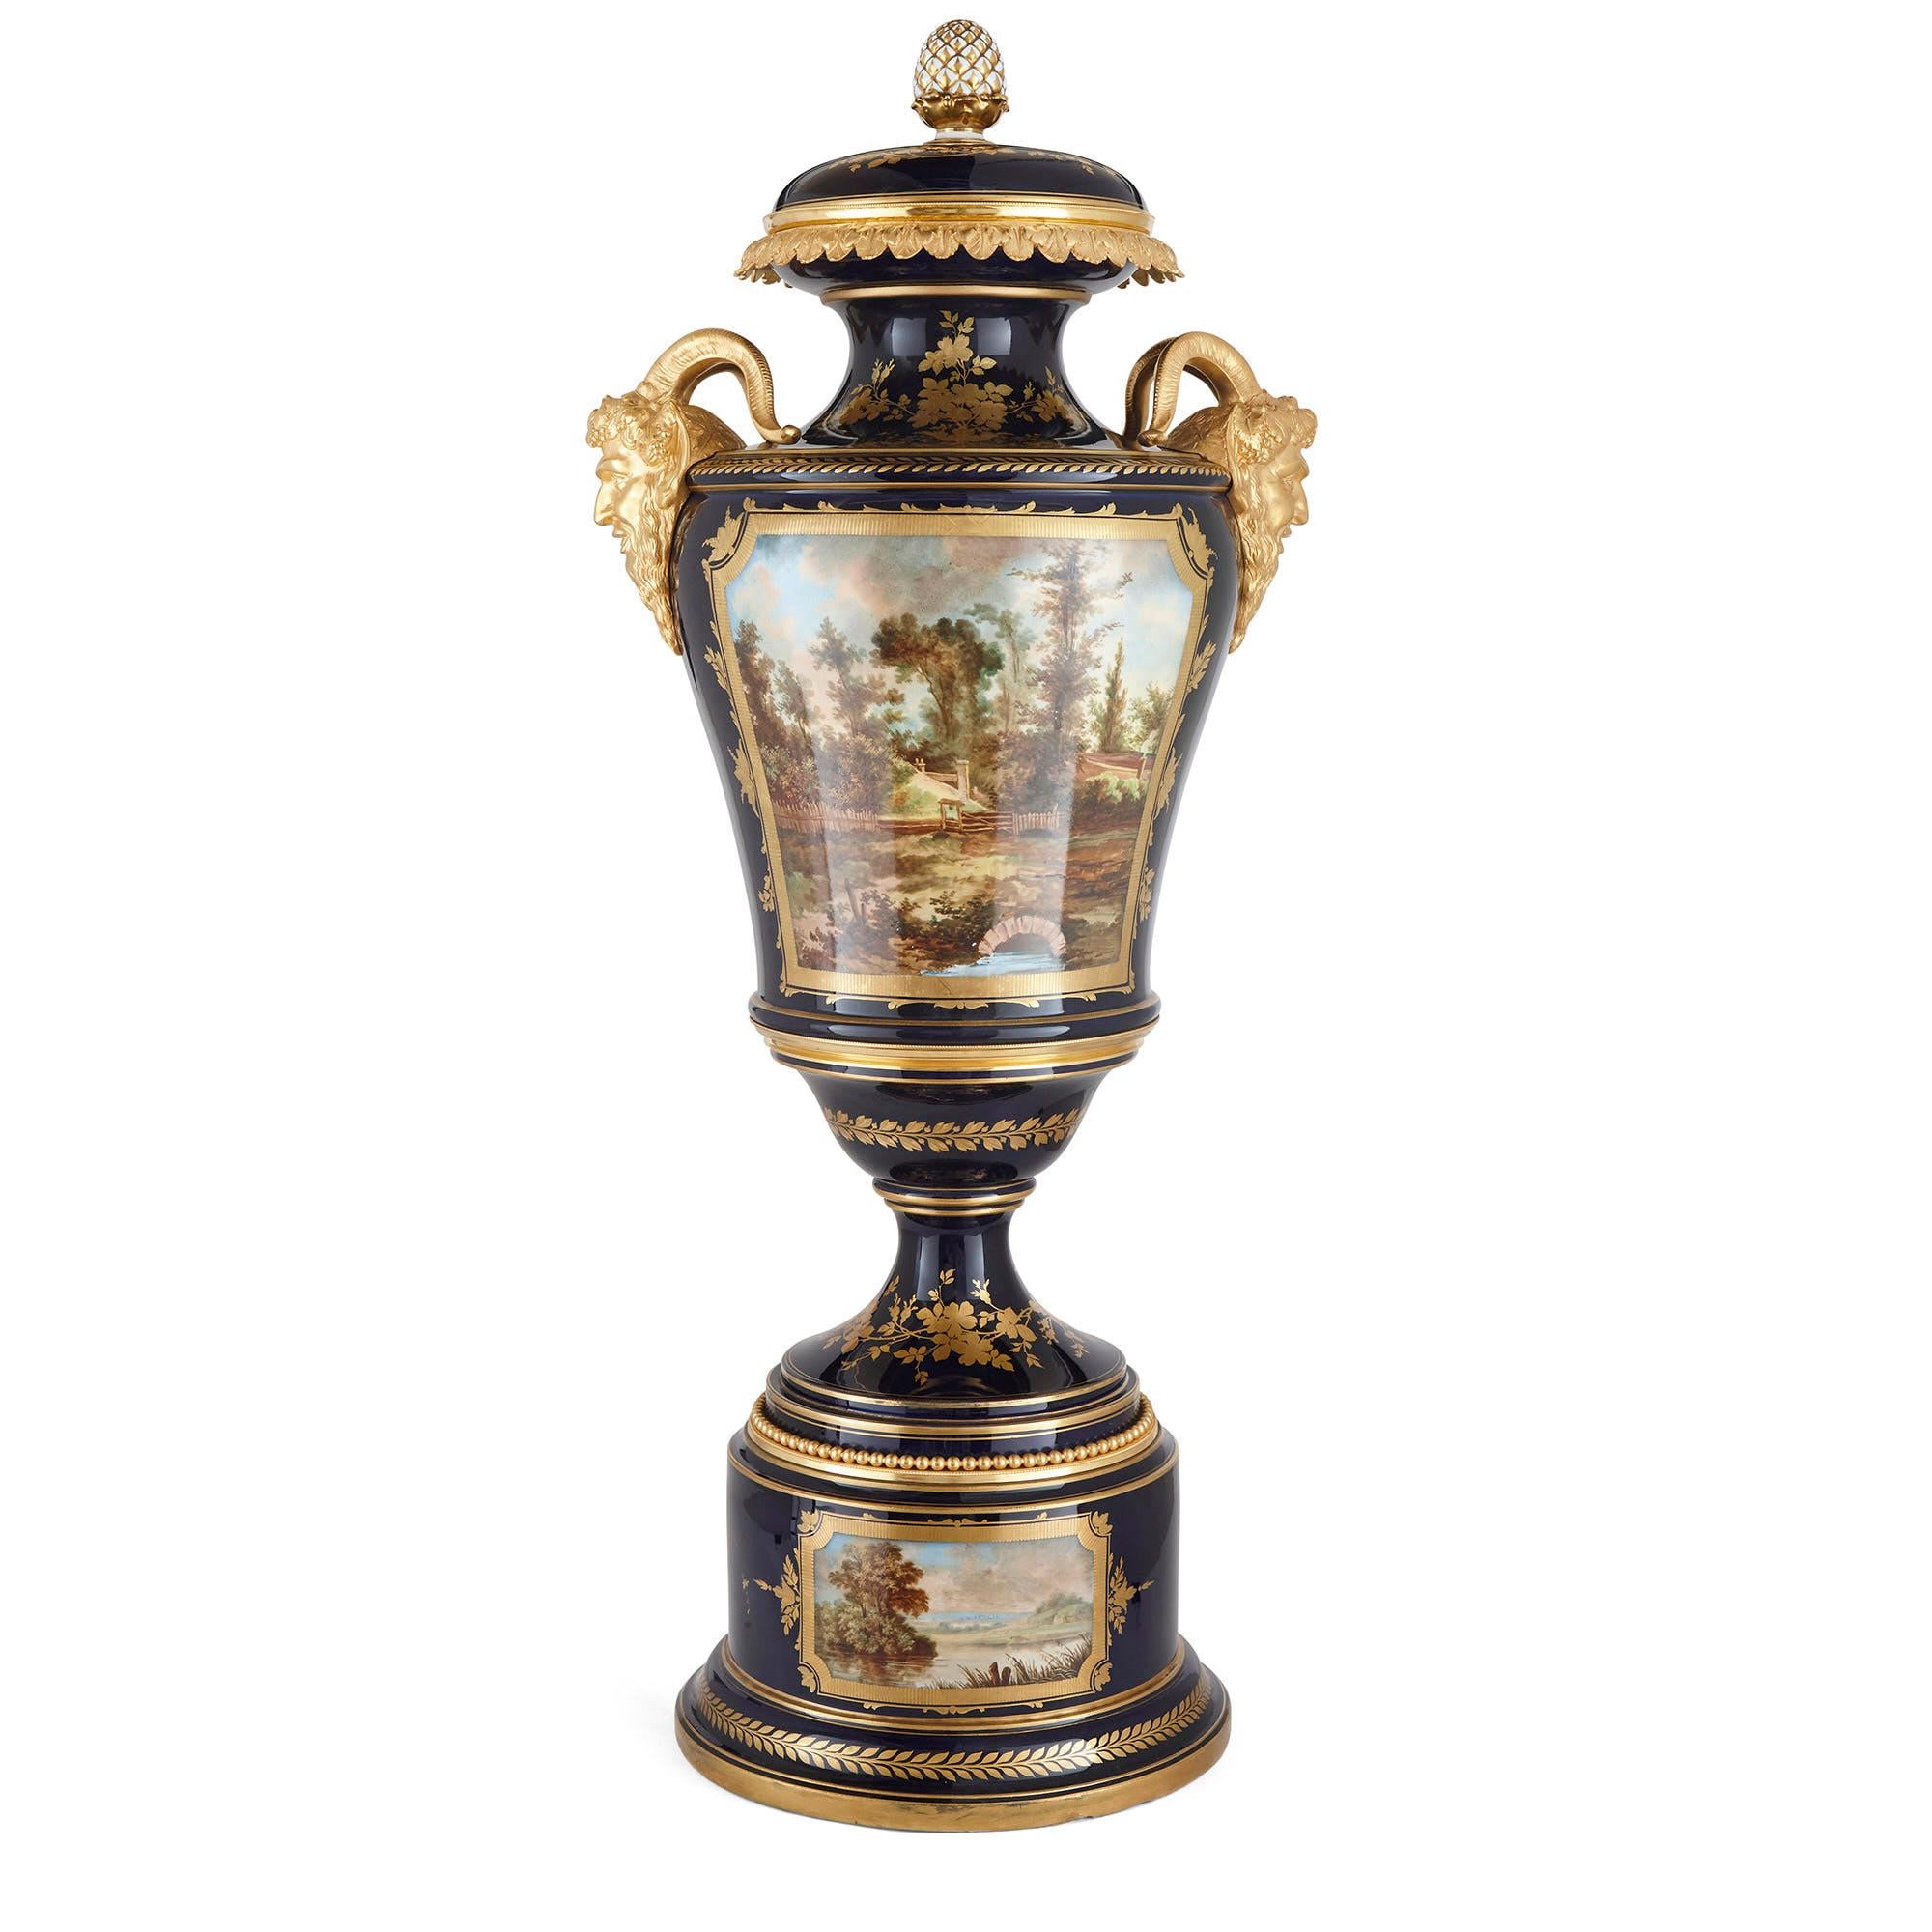 Gilt bronze mounted porcelain vase in the manner of Sèvres,
French, late 19th Century
Measures: Height 123cm, width 53cm, depth 42cm

This large porcelain vase demonstrates the best of late 19th century French design. The vase is wrought from